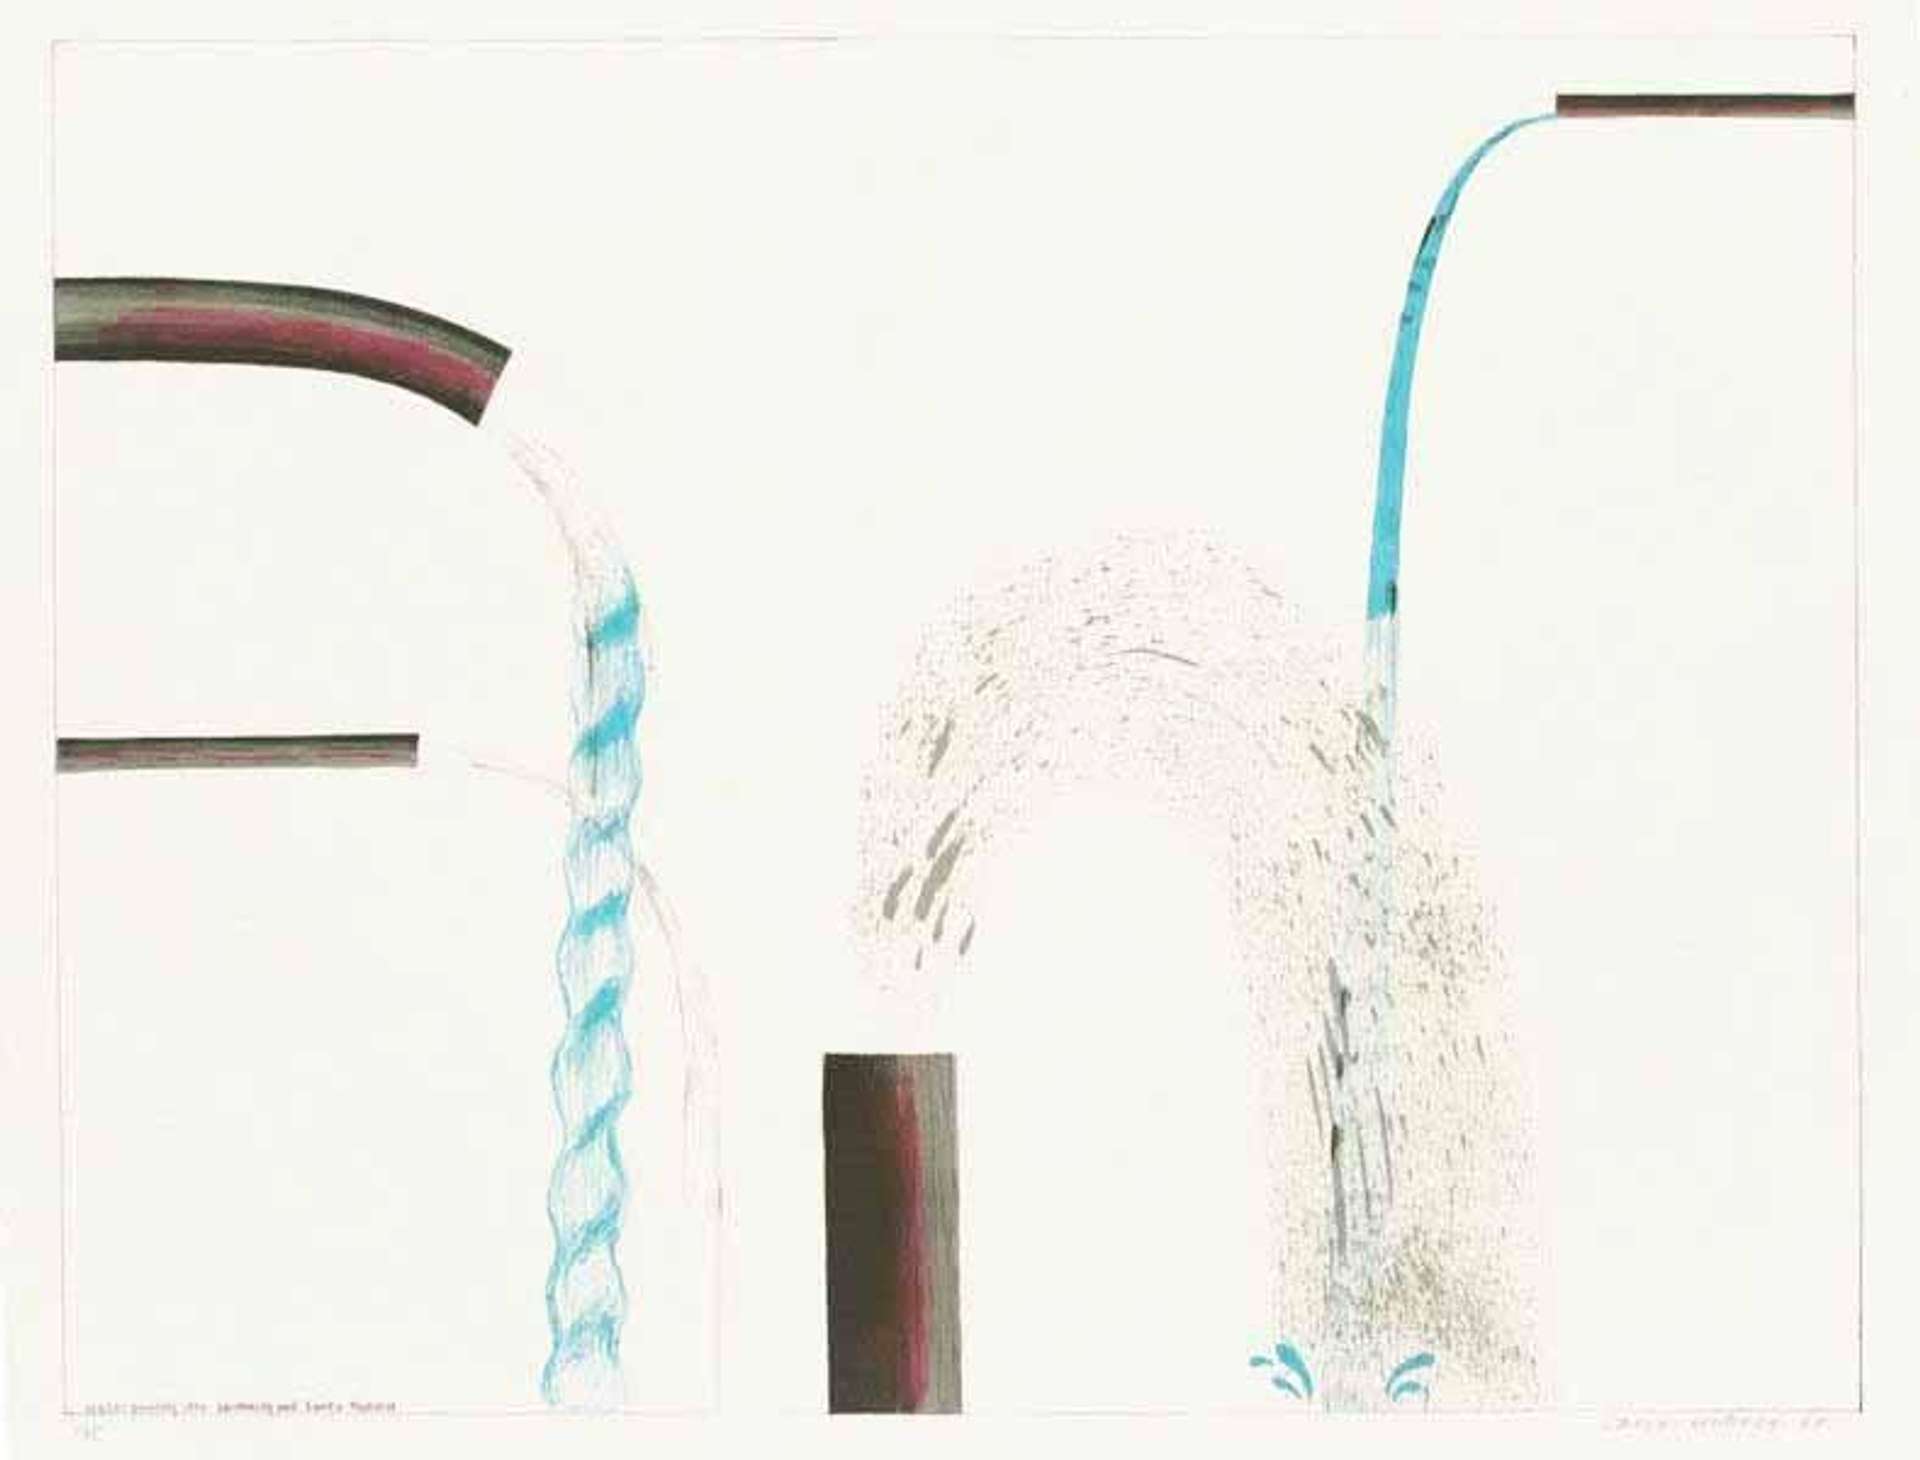 Unlike many of Hockney’s other depictions of pools, this work fails to show the actual body of water itself and instead focuses on the pipes that fill it. Here they are presented at various angles, appearing like a fountain or elaborate water feature in a garden. Out of each pipe gushes out water of varying qualities, one stream is spiralled like the tusk of a narwhal or a merry go round pole, another is a thin transparent stream, while the middle one emits a kind of thick spray. 